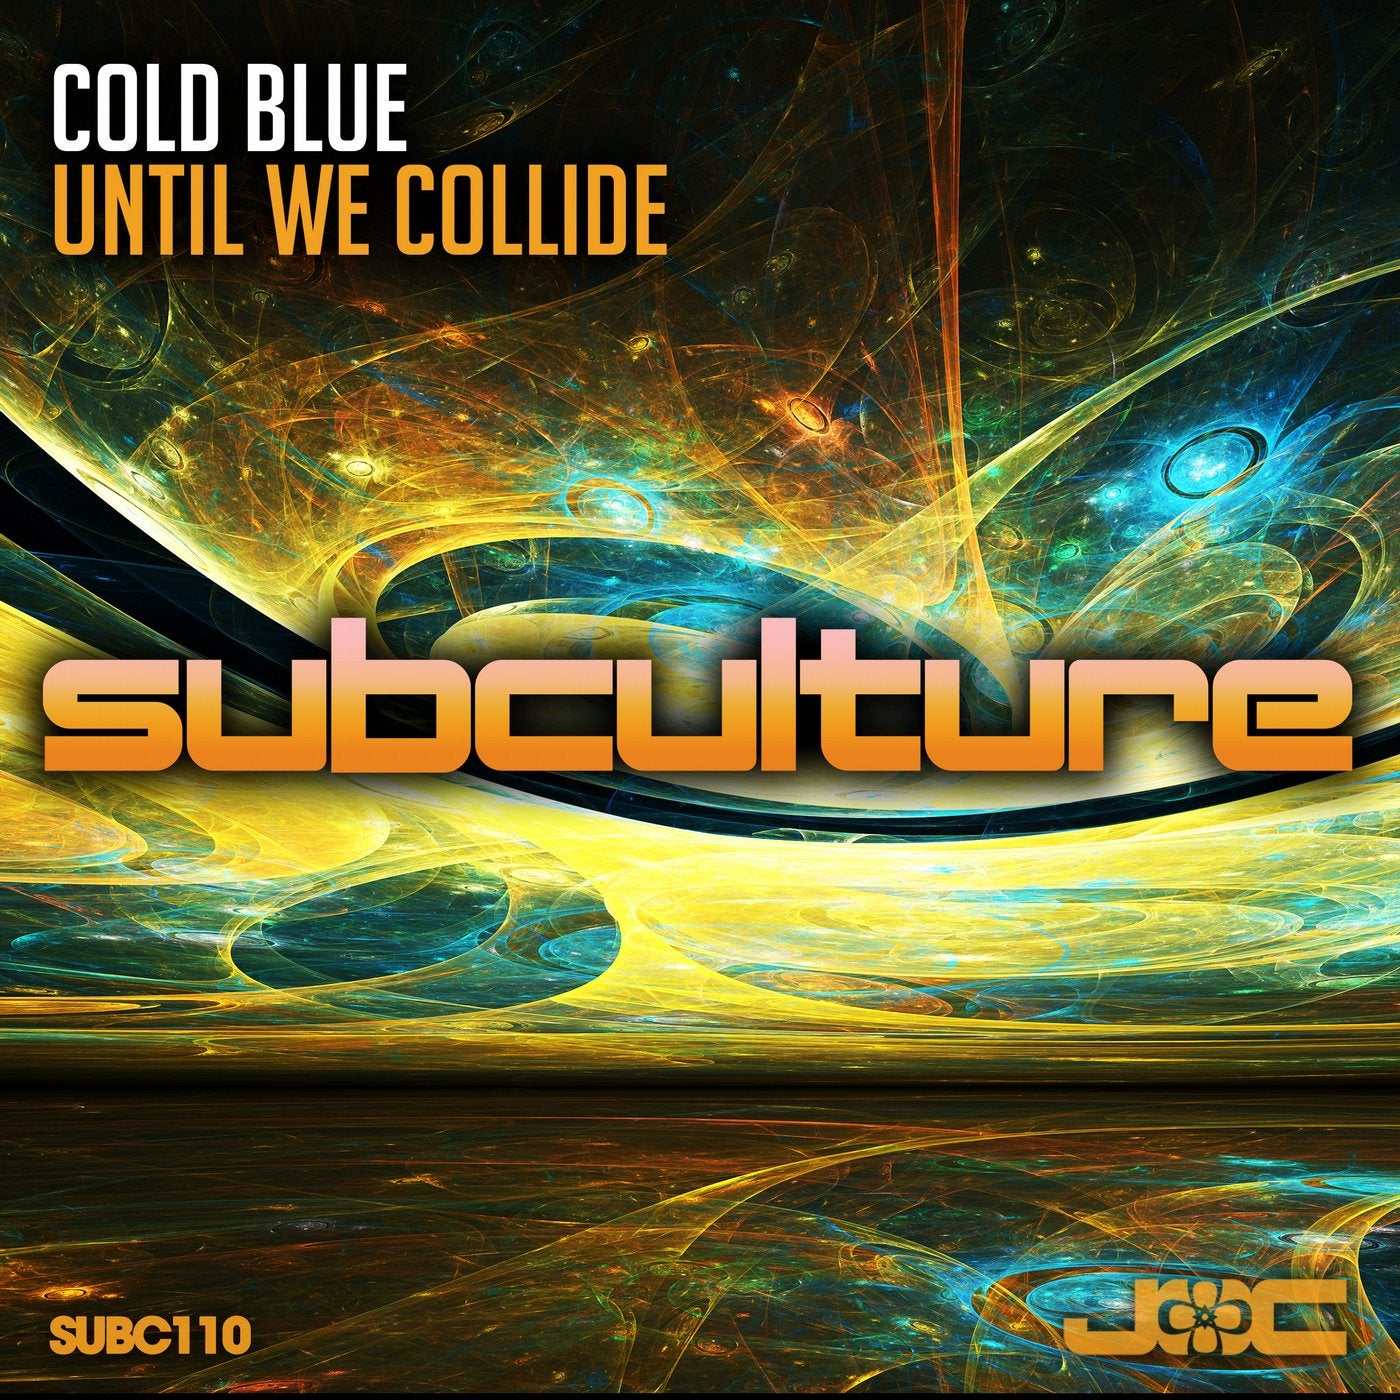 Collide. Cold Blue. Collide музыка. Cold Blue - Black Rock. Музыка cold